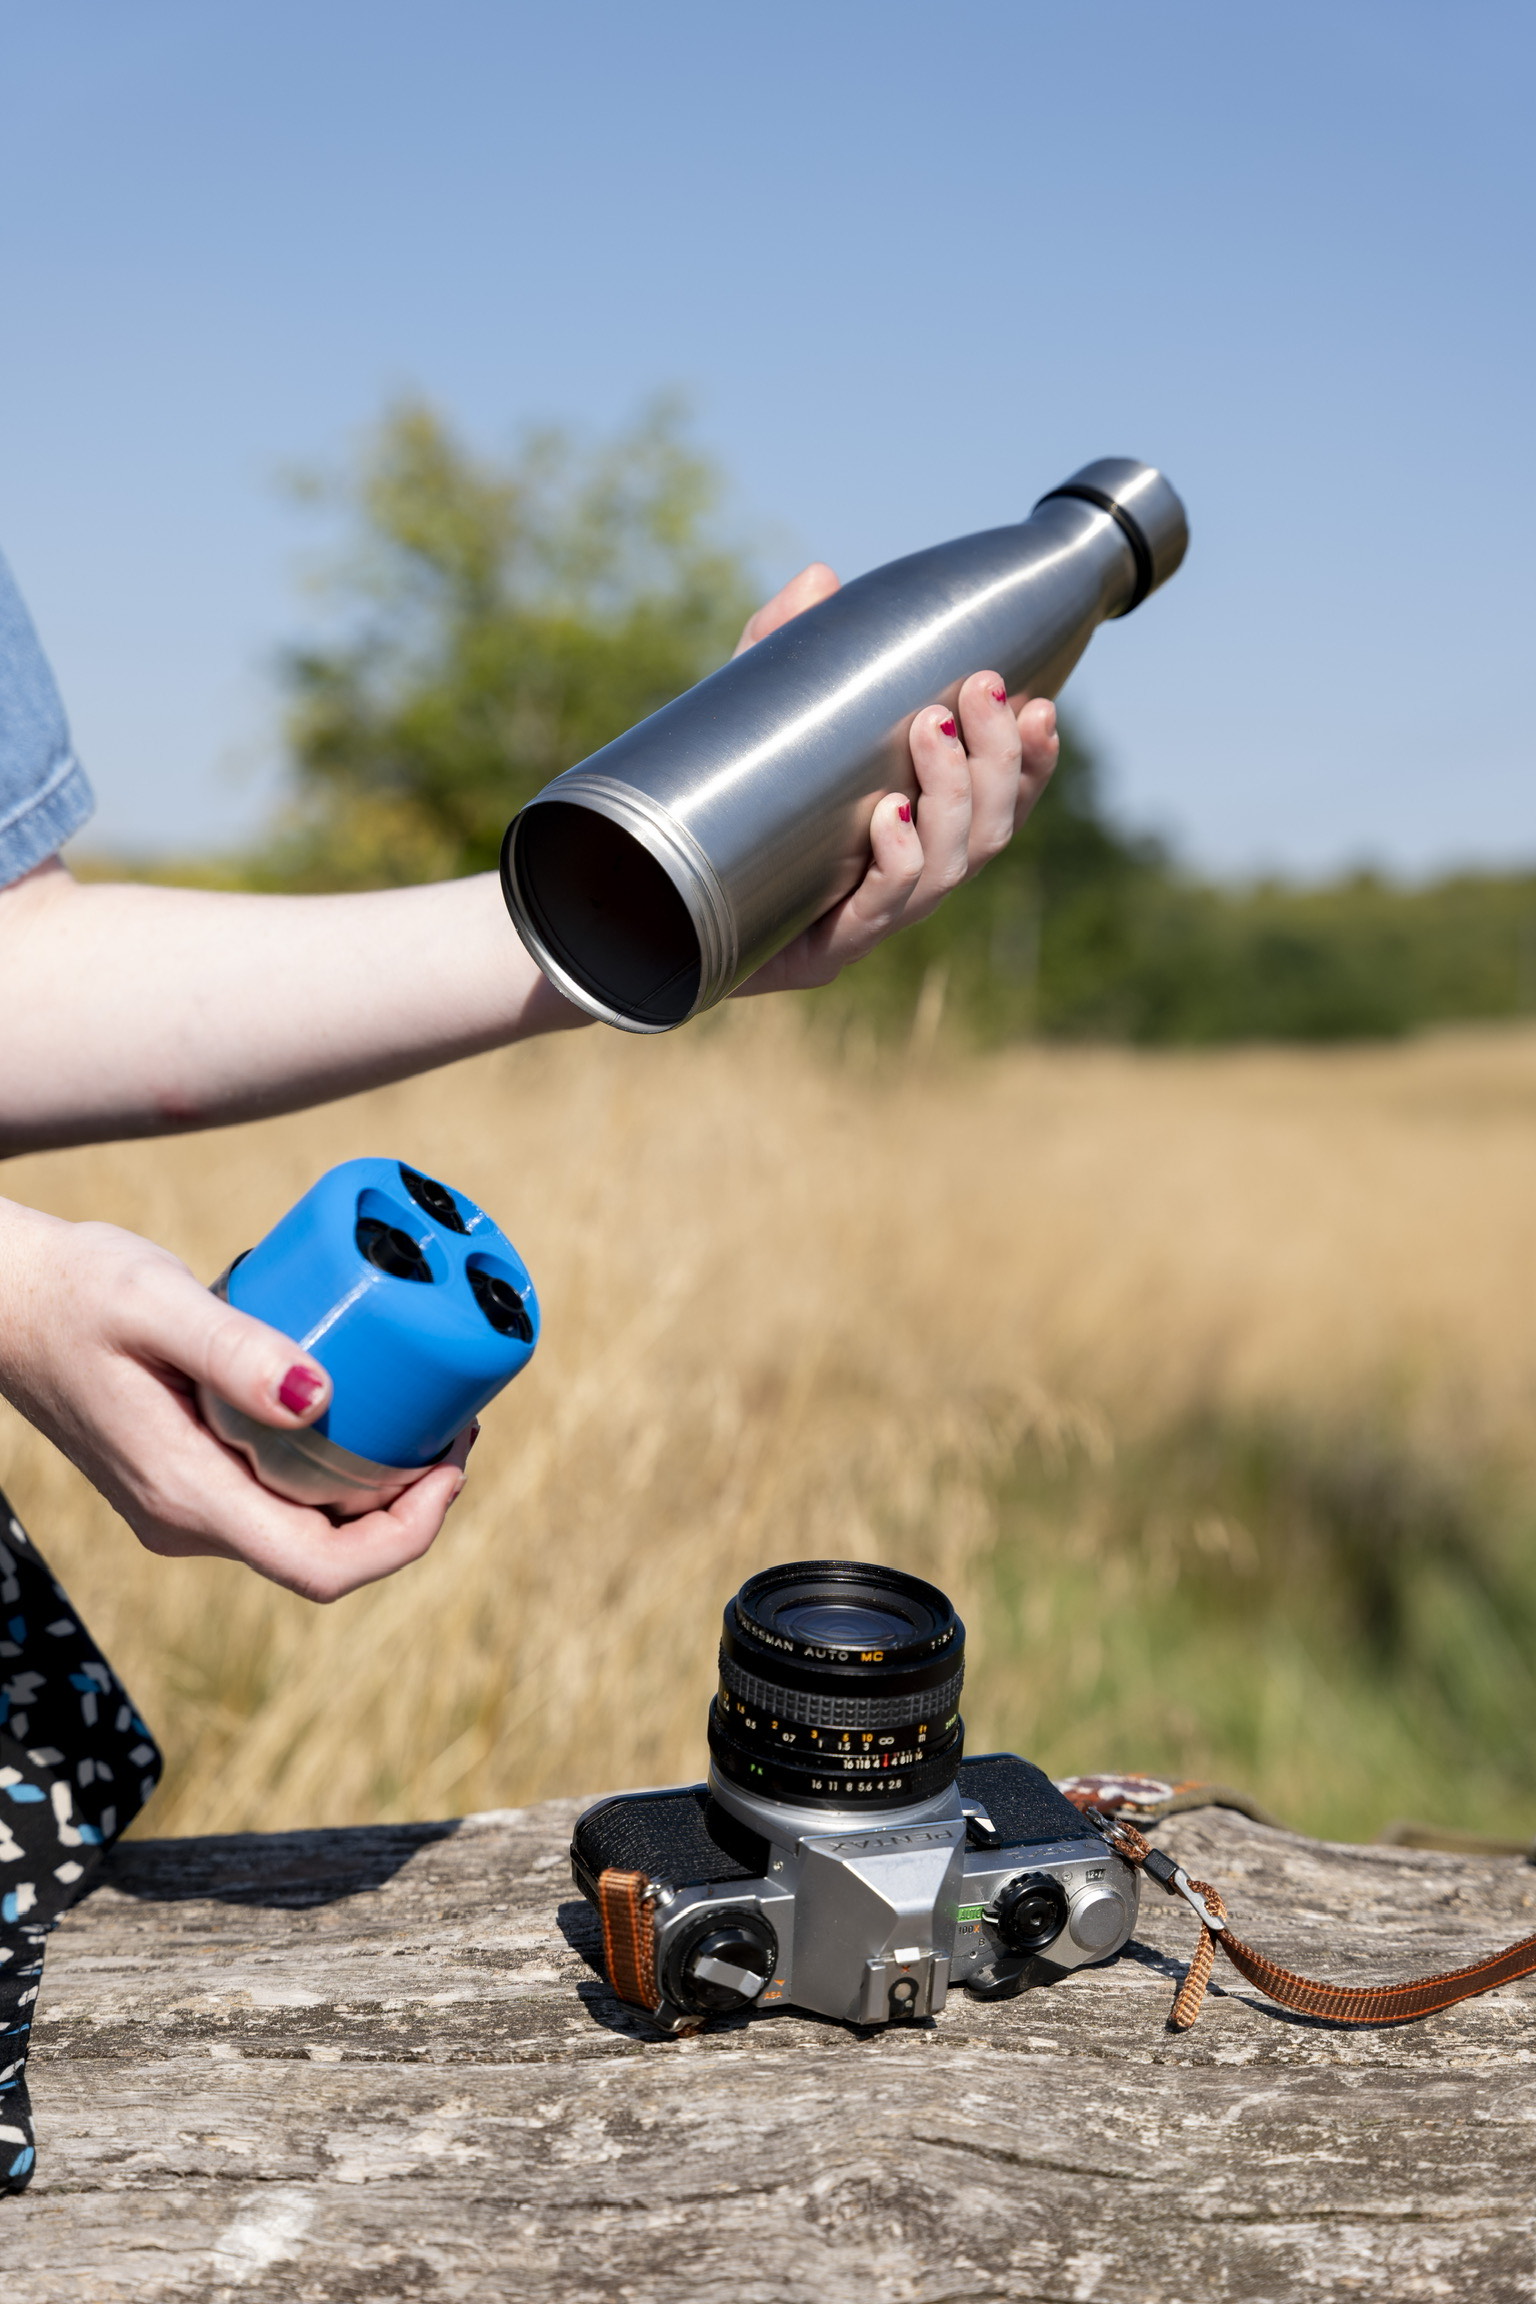 PPP bottle with camera (Pic: PPP)